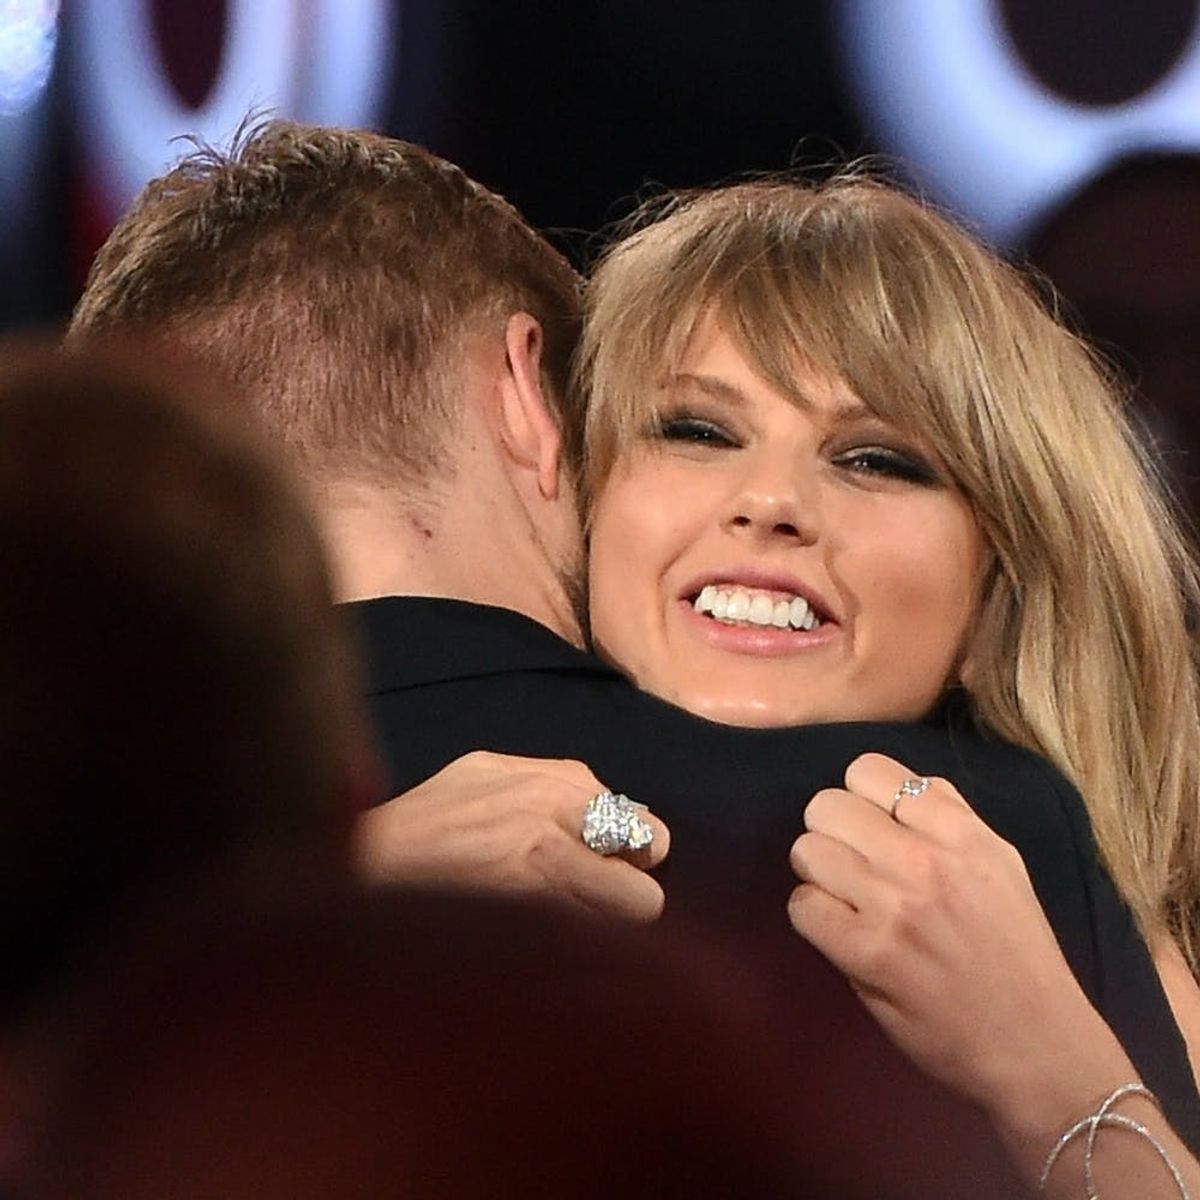 Calvin Harris Is FINALLY Giving Taylor Swift Credit for the Song She Co-Wrote